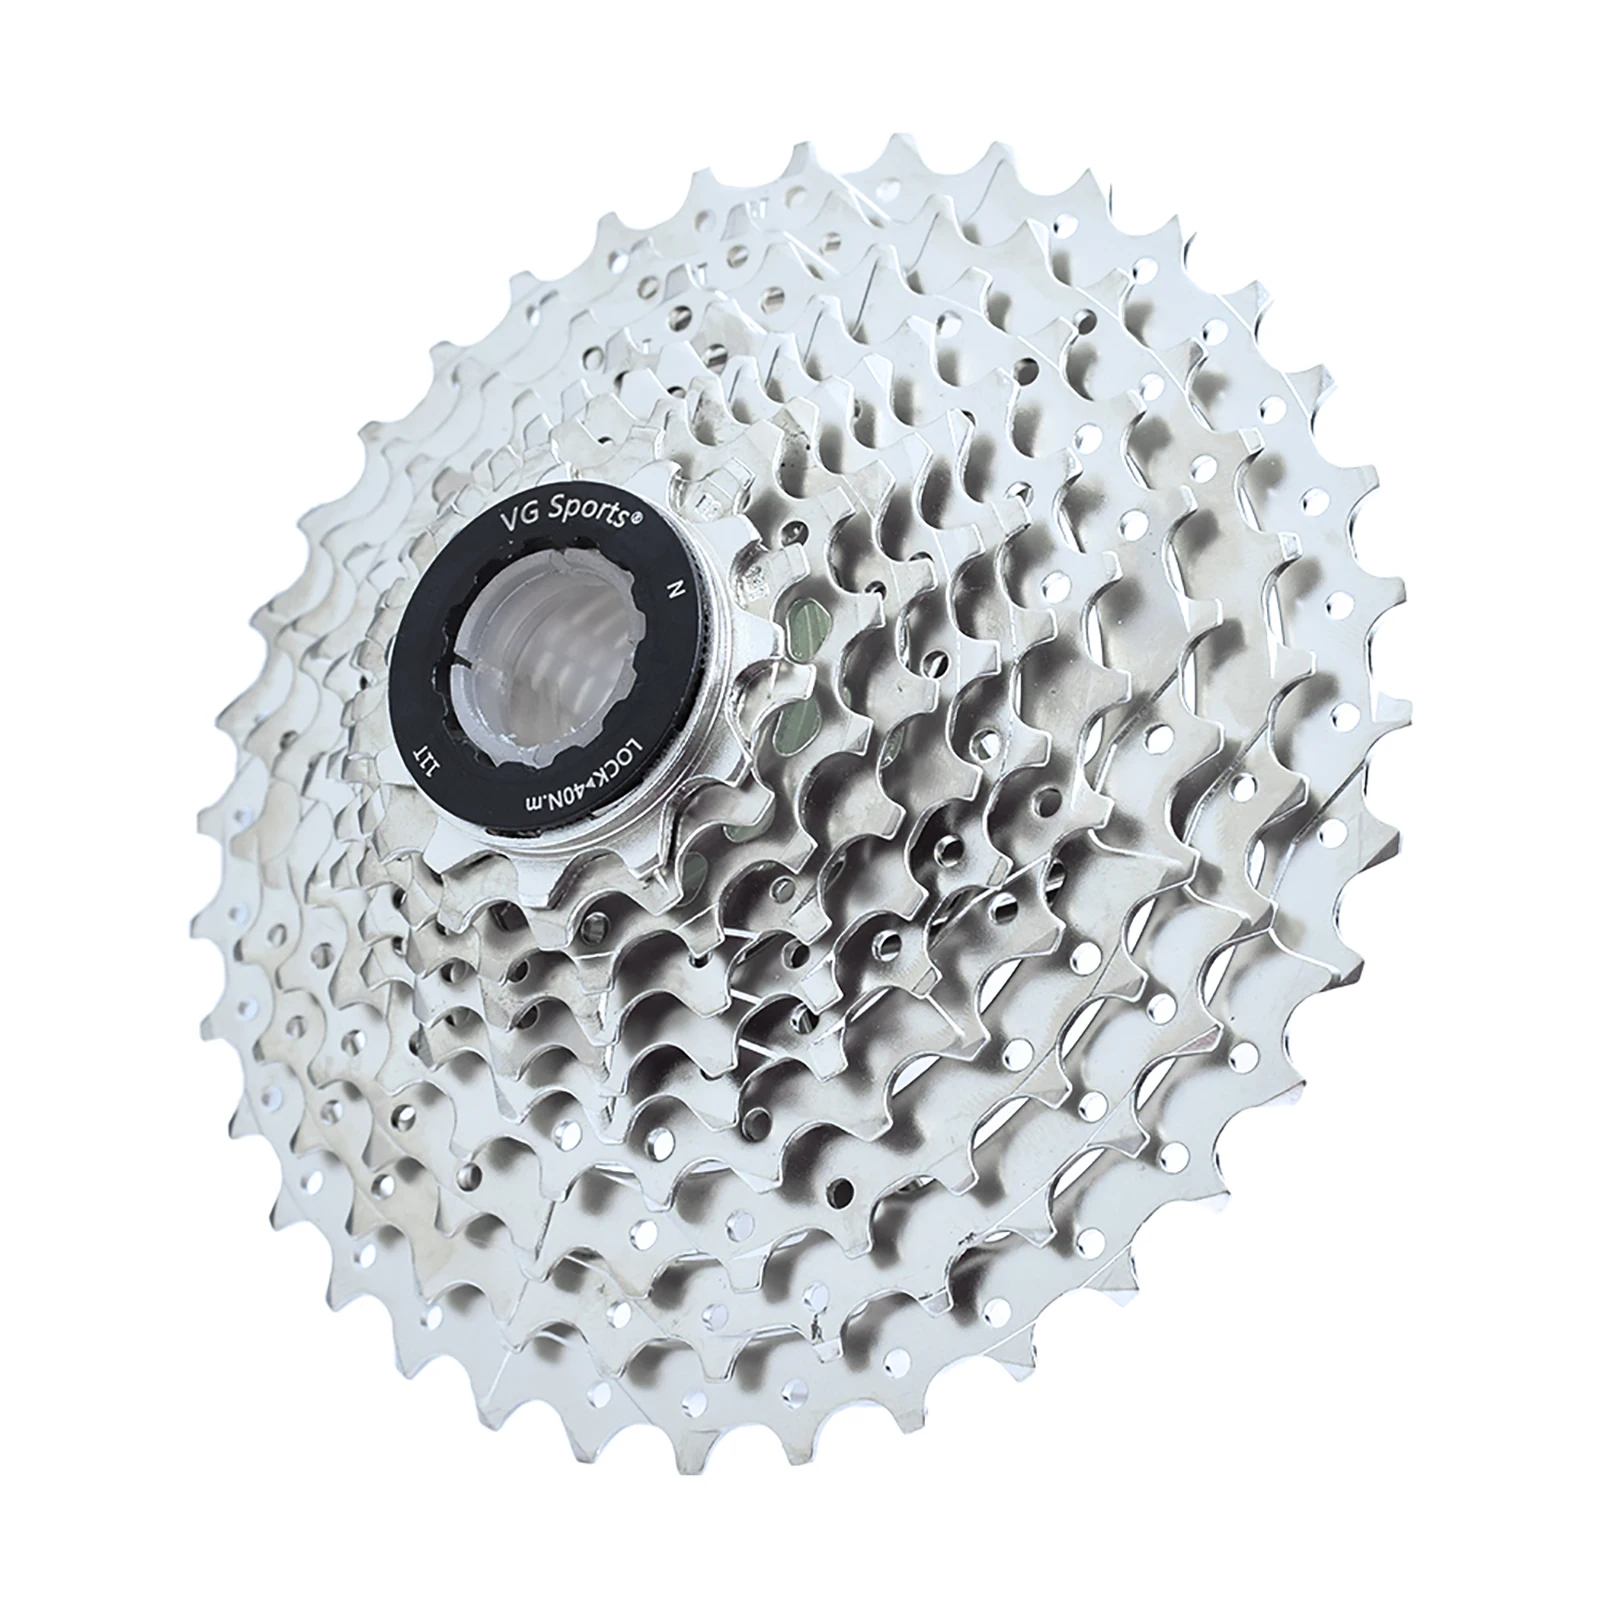 

VG Sports 10 Speed 11-36T Bicycle Cassette Freewheel for MTB Mountain Bike Parts, Silver,gold,black